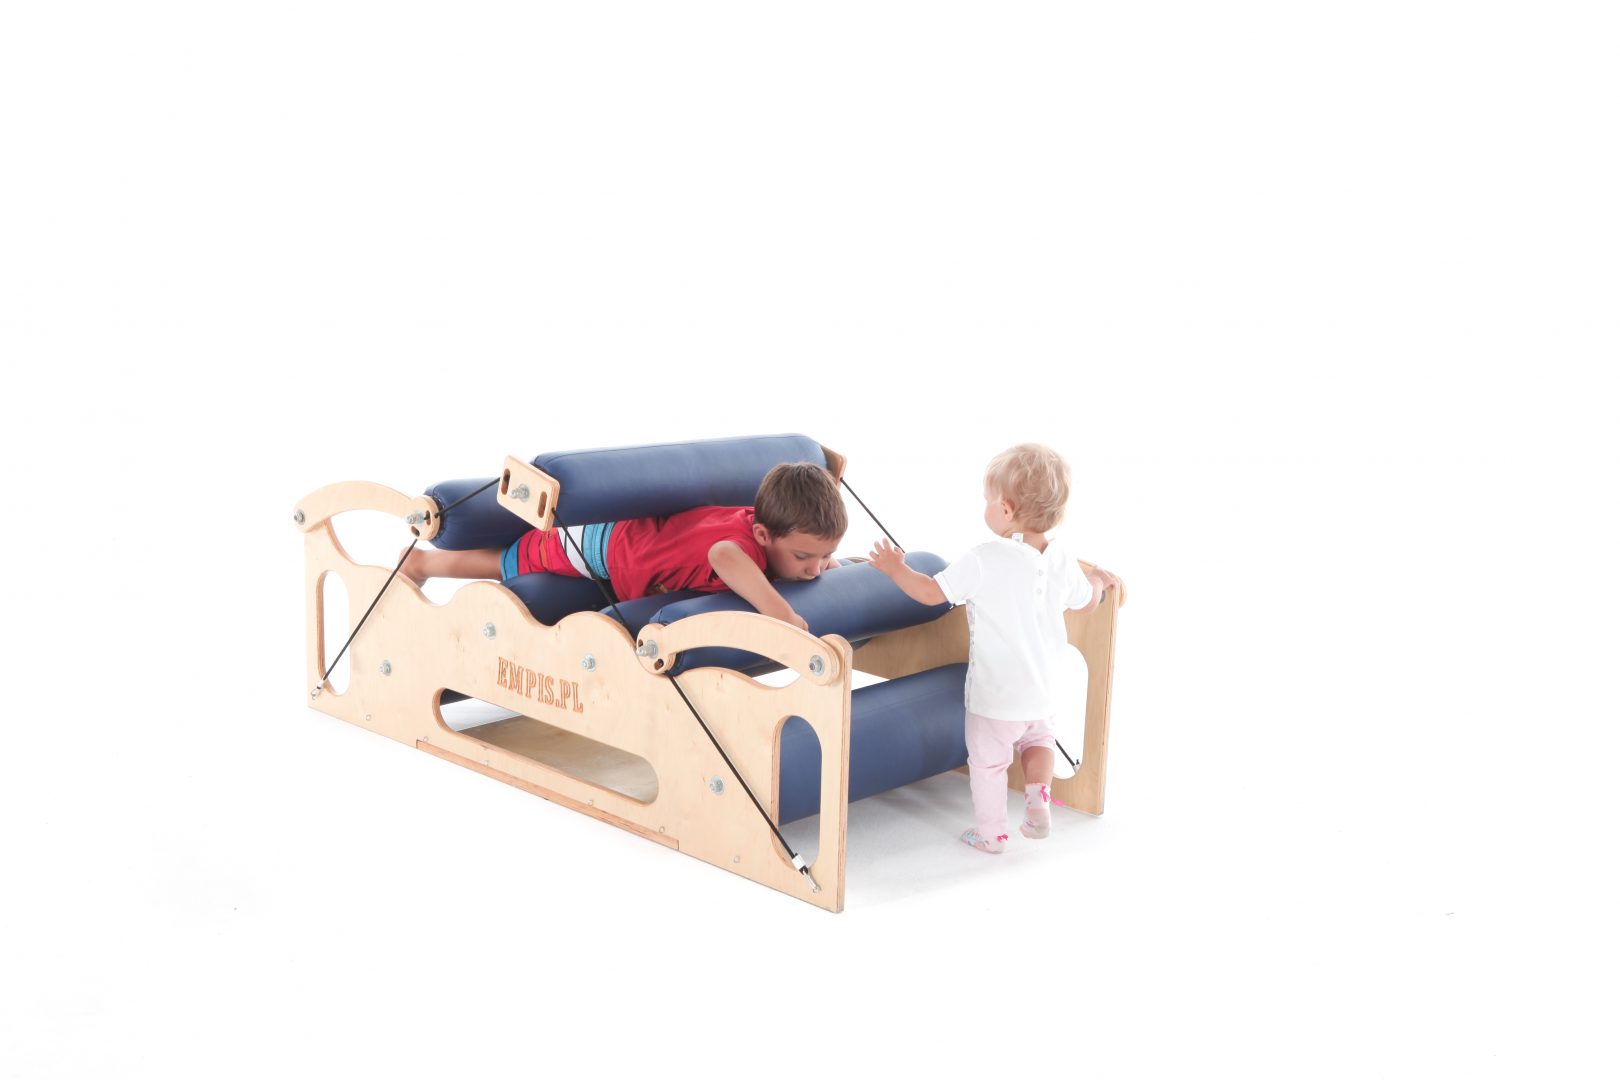 Large sensory body roller used in sensory integration featuring two children using the machine